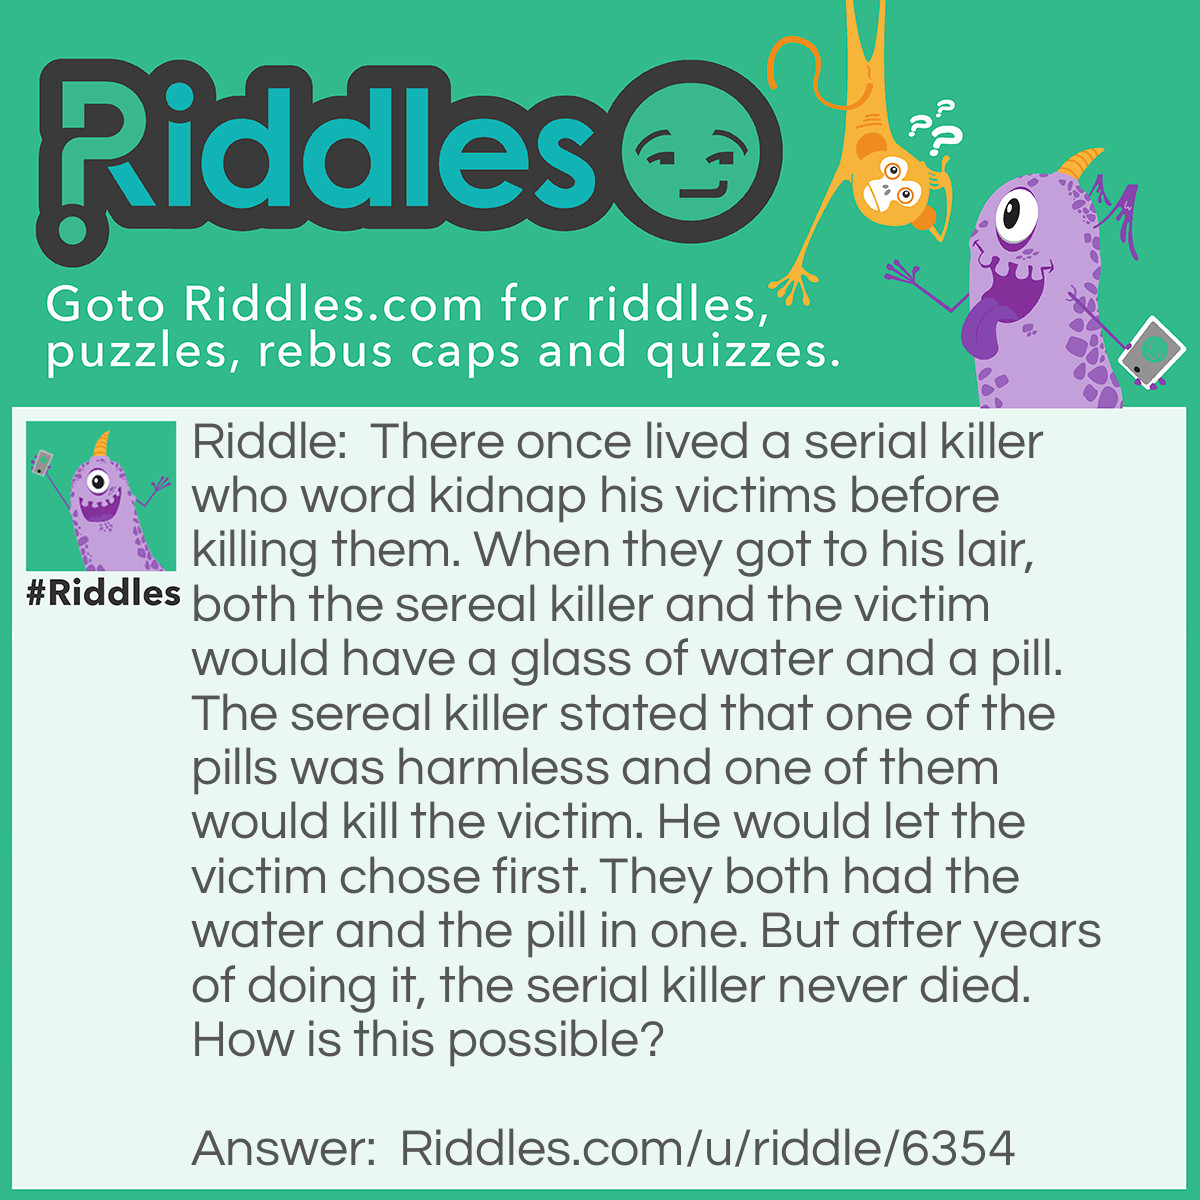 Riddle: There once lived a serial killer who word kidnap his victims before killing them. When they got to his lair,both the sereal killer and the victim would have a glass of water and a pill. The sereal killer stated that one of the pills was harmless and one of them would kill the victim. He would let the victim chose first. They both had the water and the pill in one. But after years of doing it, the serial killer never died. How is this possible? Answer: Beforehand, the serial killer would poison the victims water but not his own. Both the pills were completely harmless.